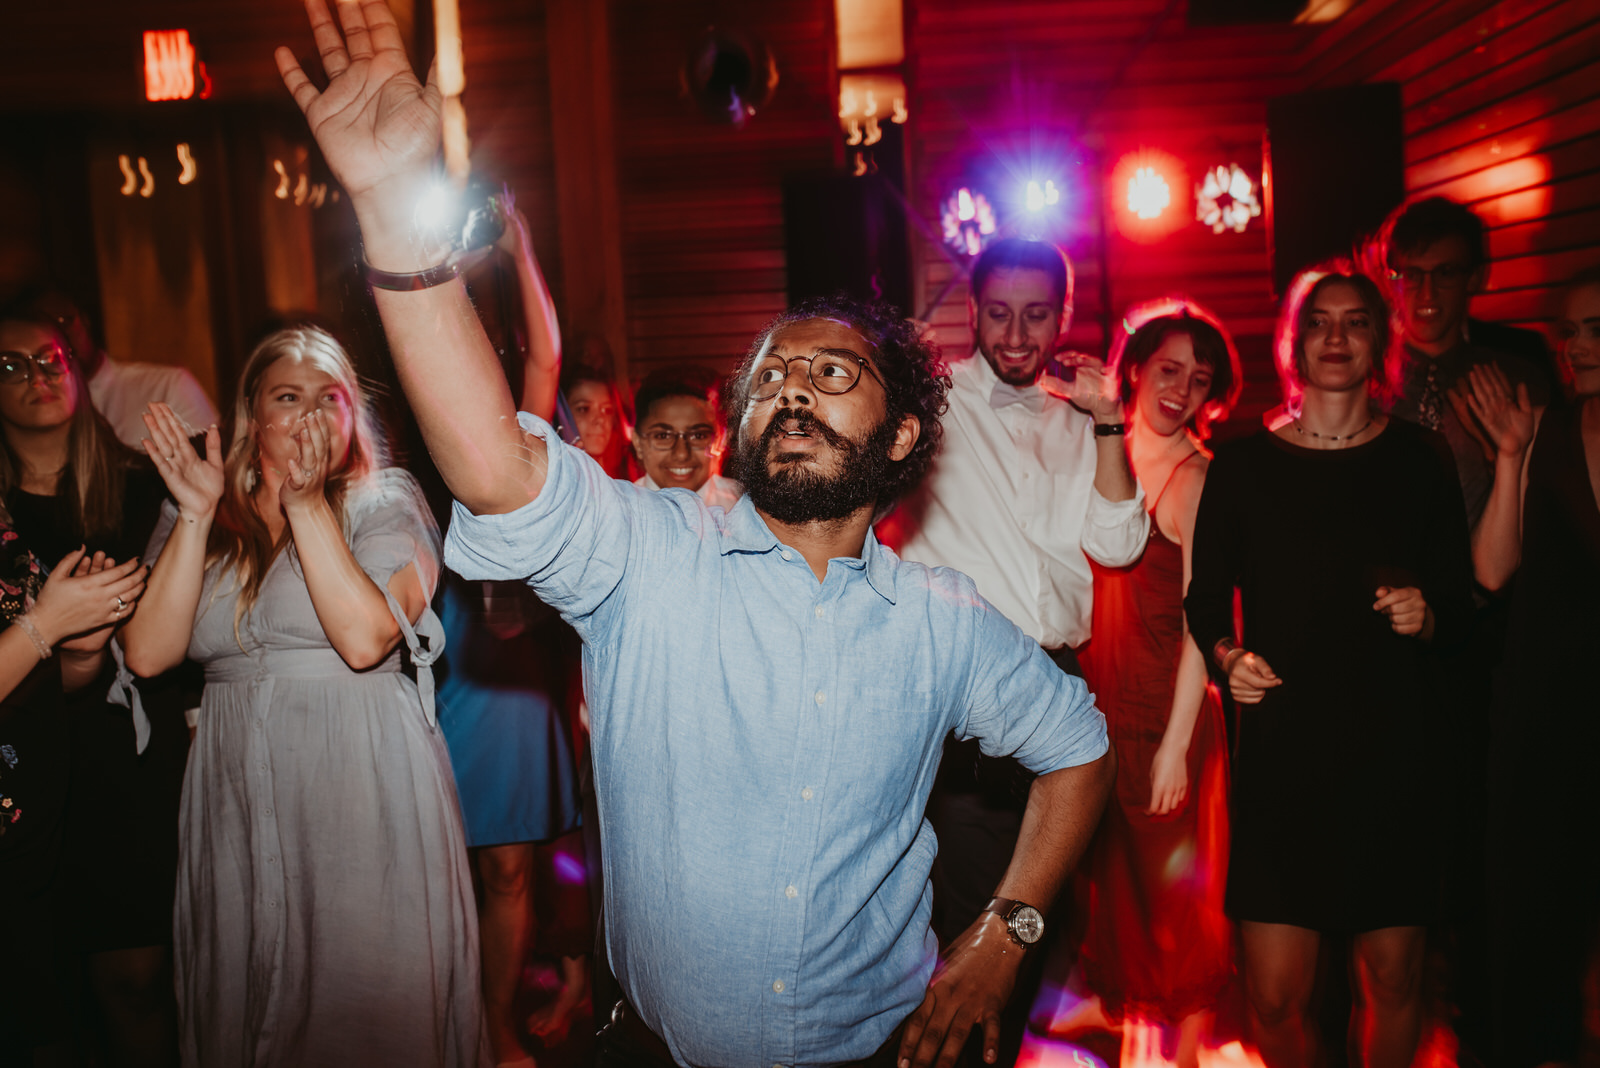 Crazy indian dance party, Bissell tree house Michigan, moody photography, Chicago wedding photography - The Adamkovi